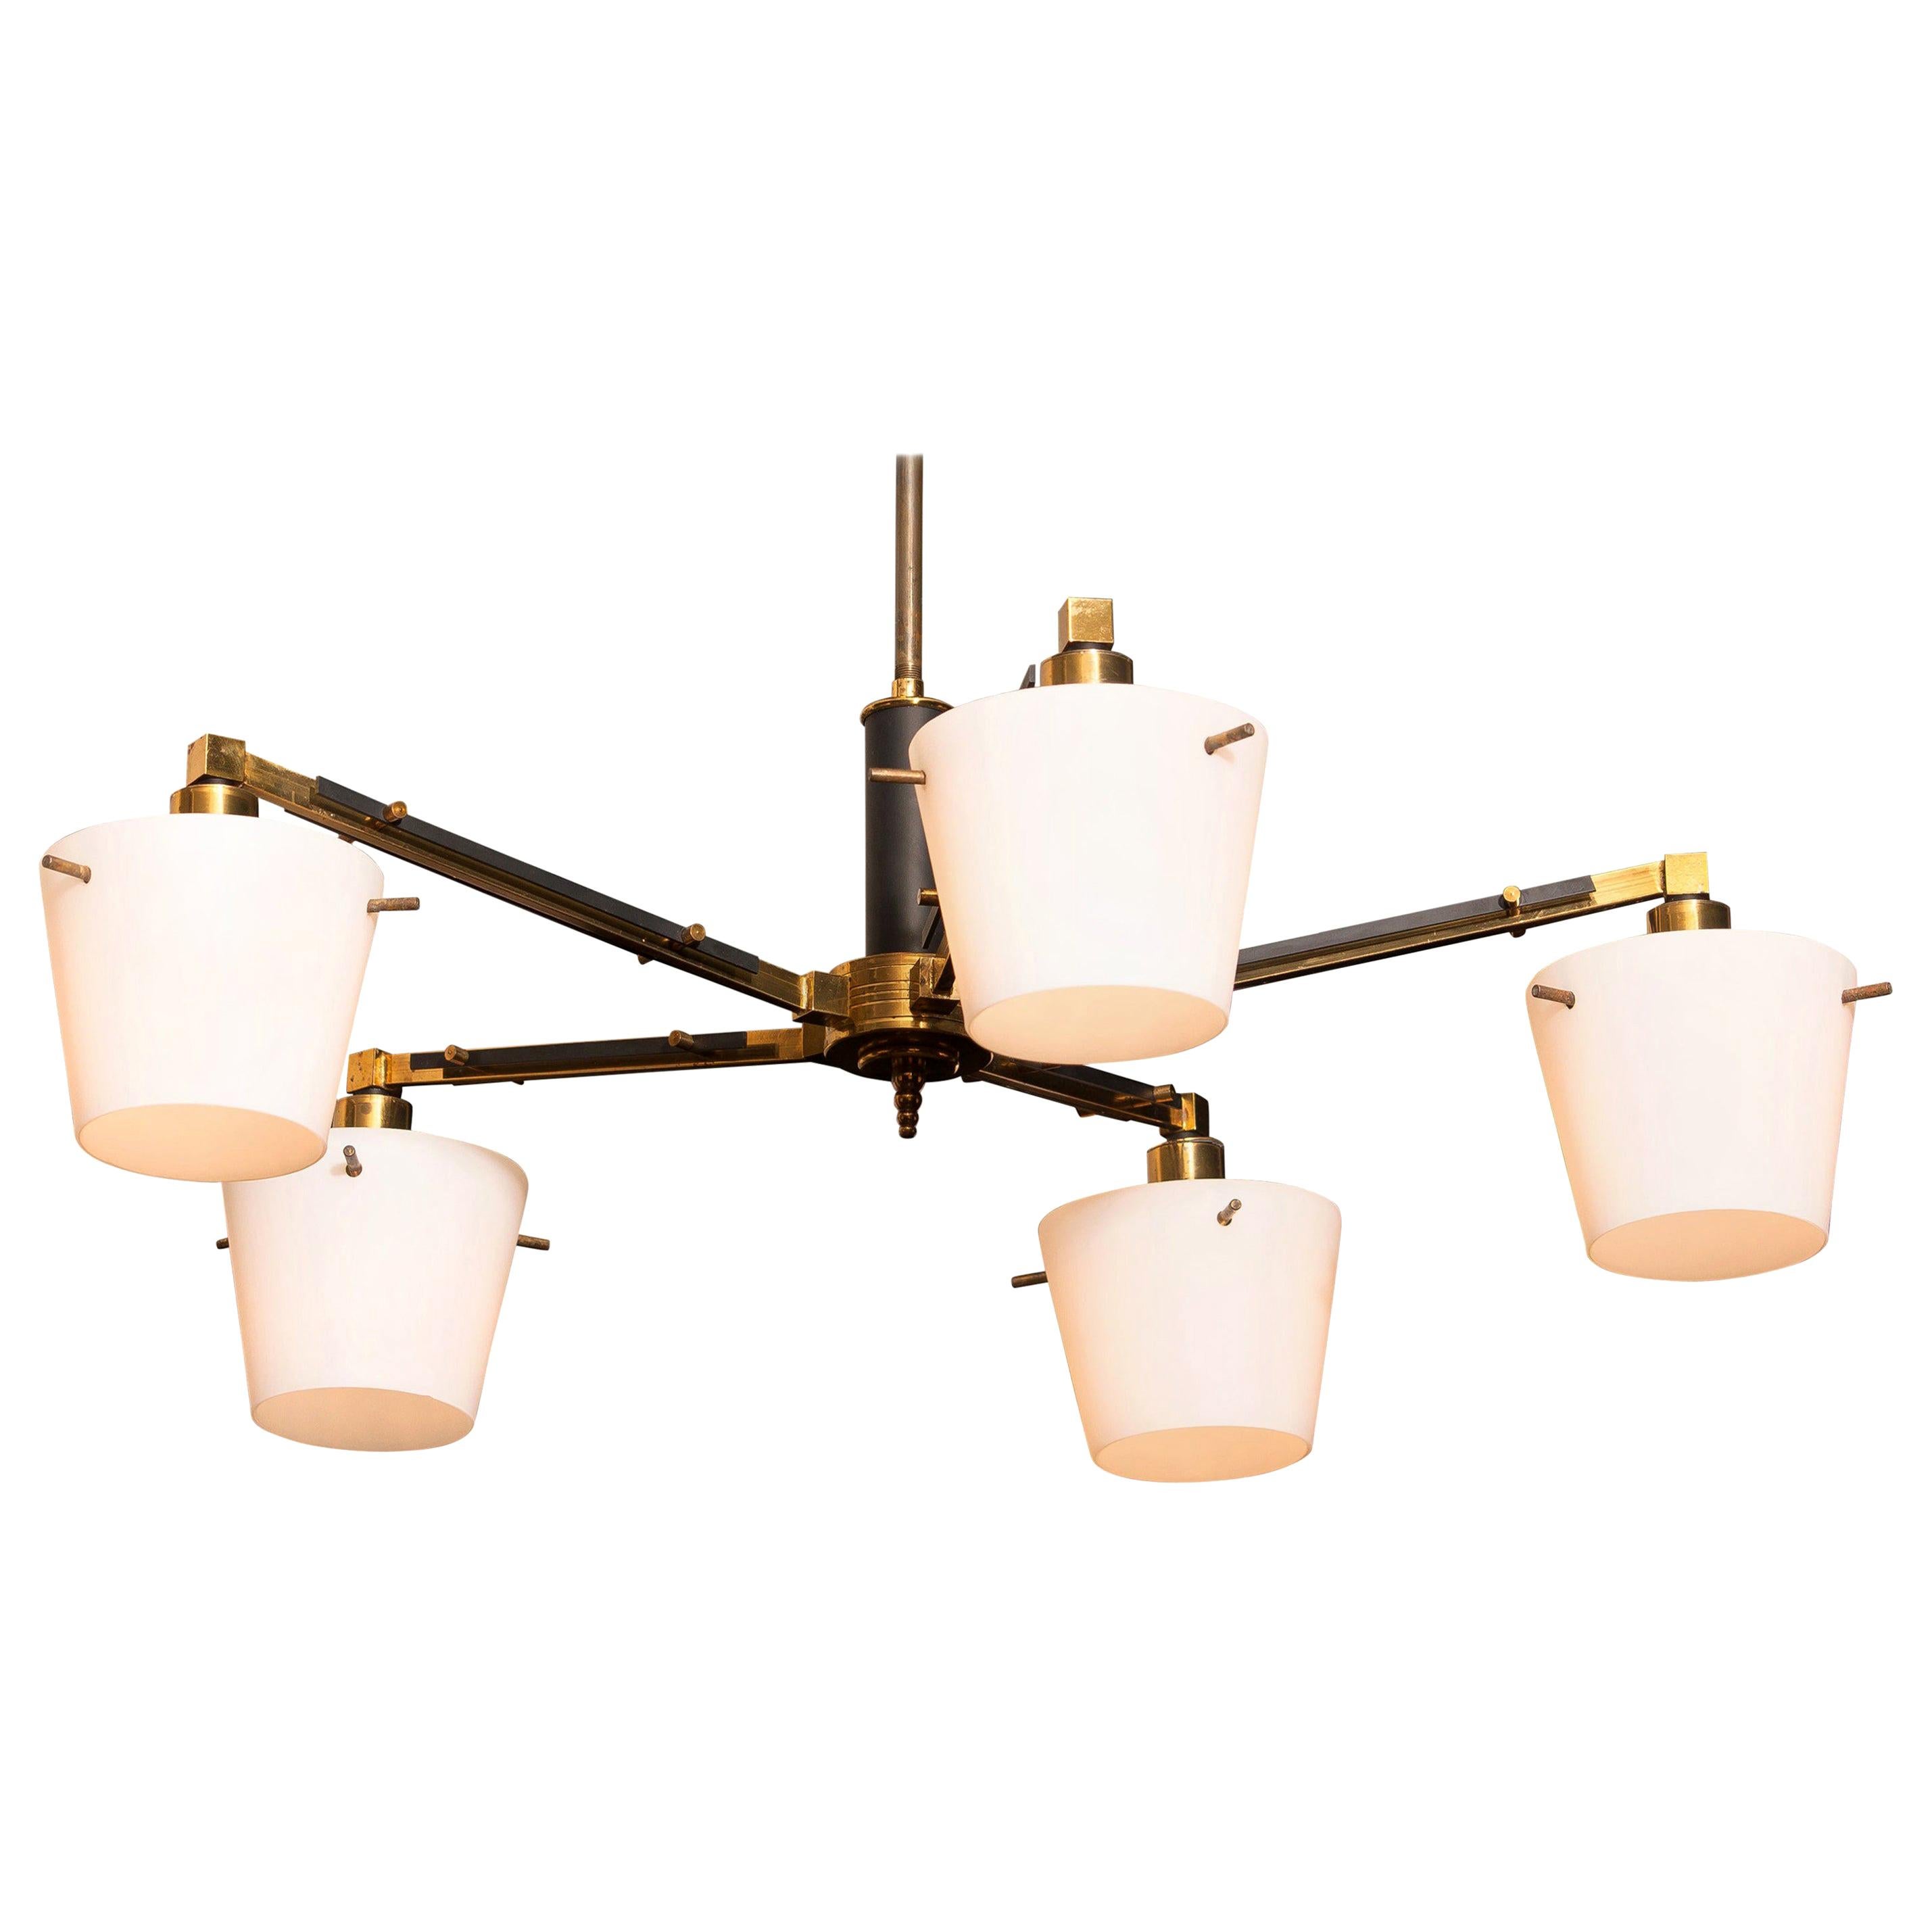 Italian 1950s, Brass Chandelier with Frosted Glass Shades, Italy